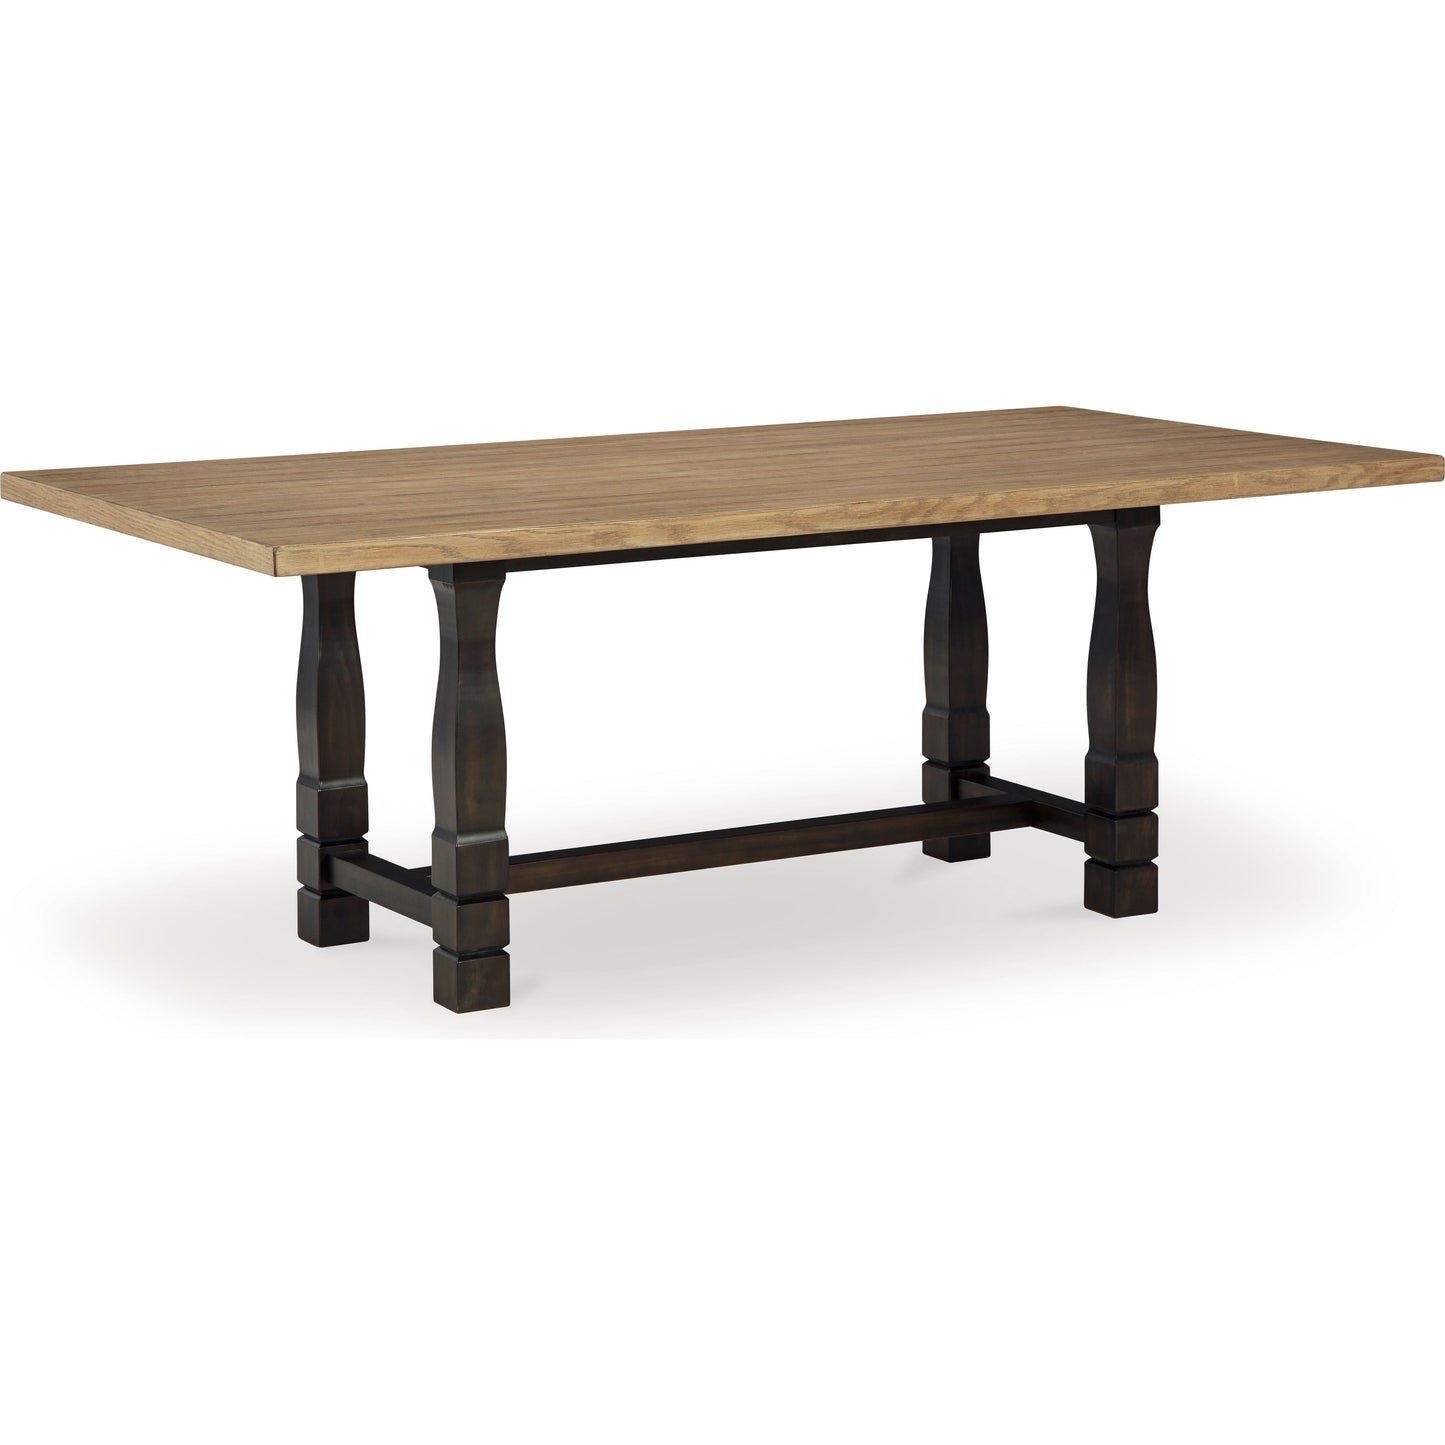 CHARTERTON DINING TABLE - TWO TONE BROWN